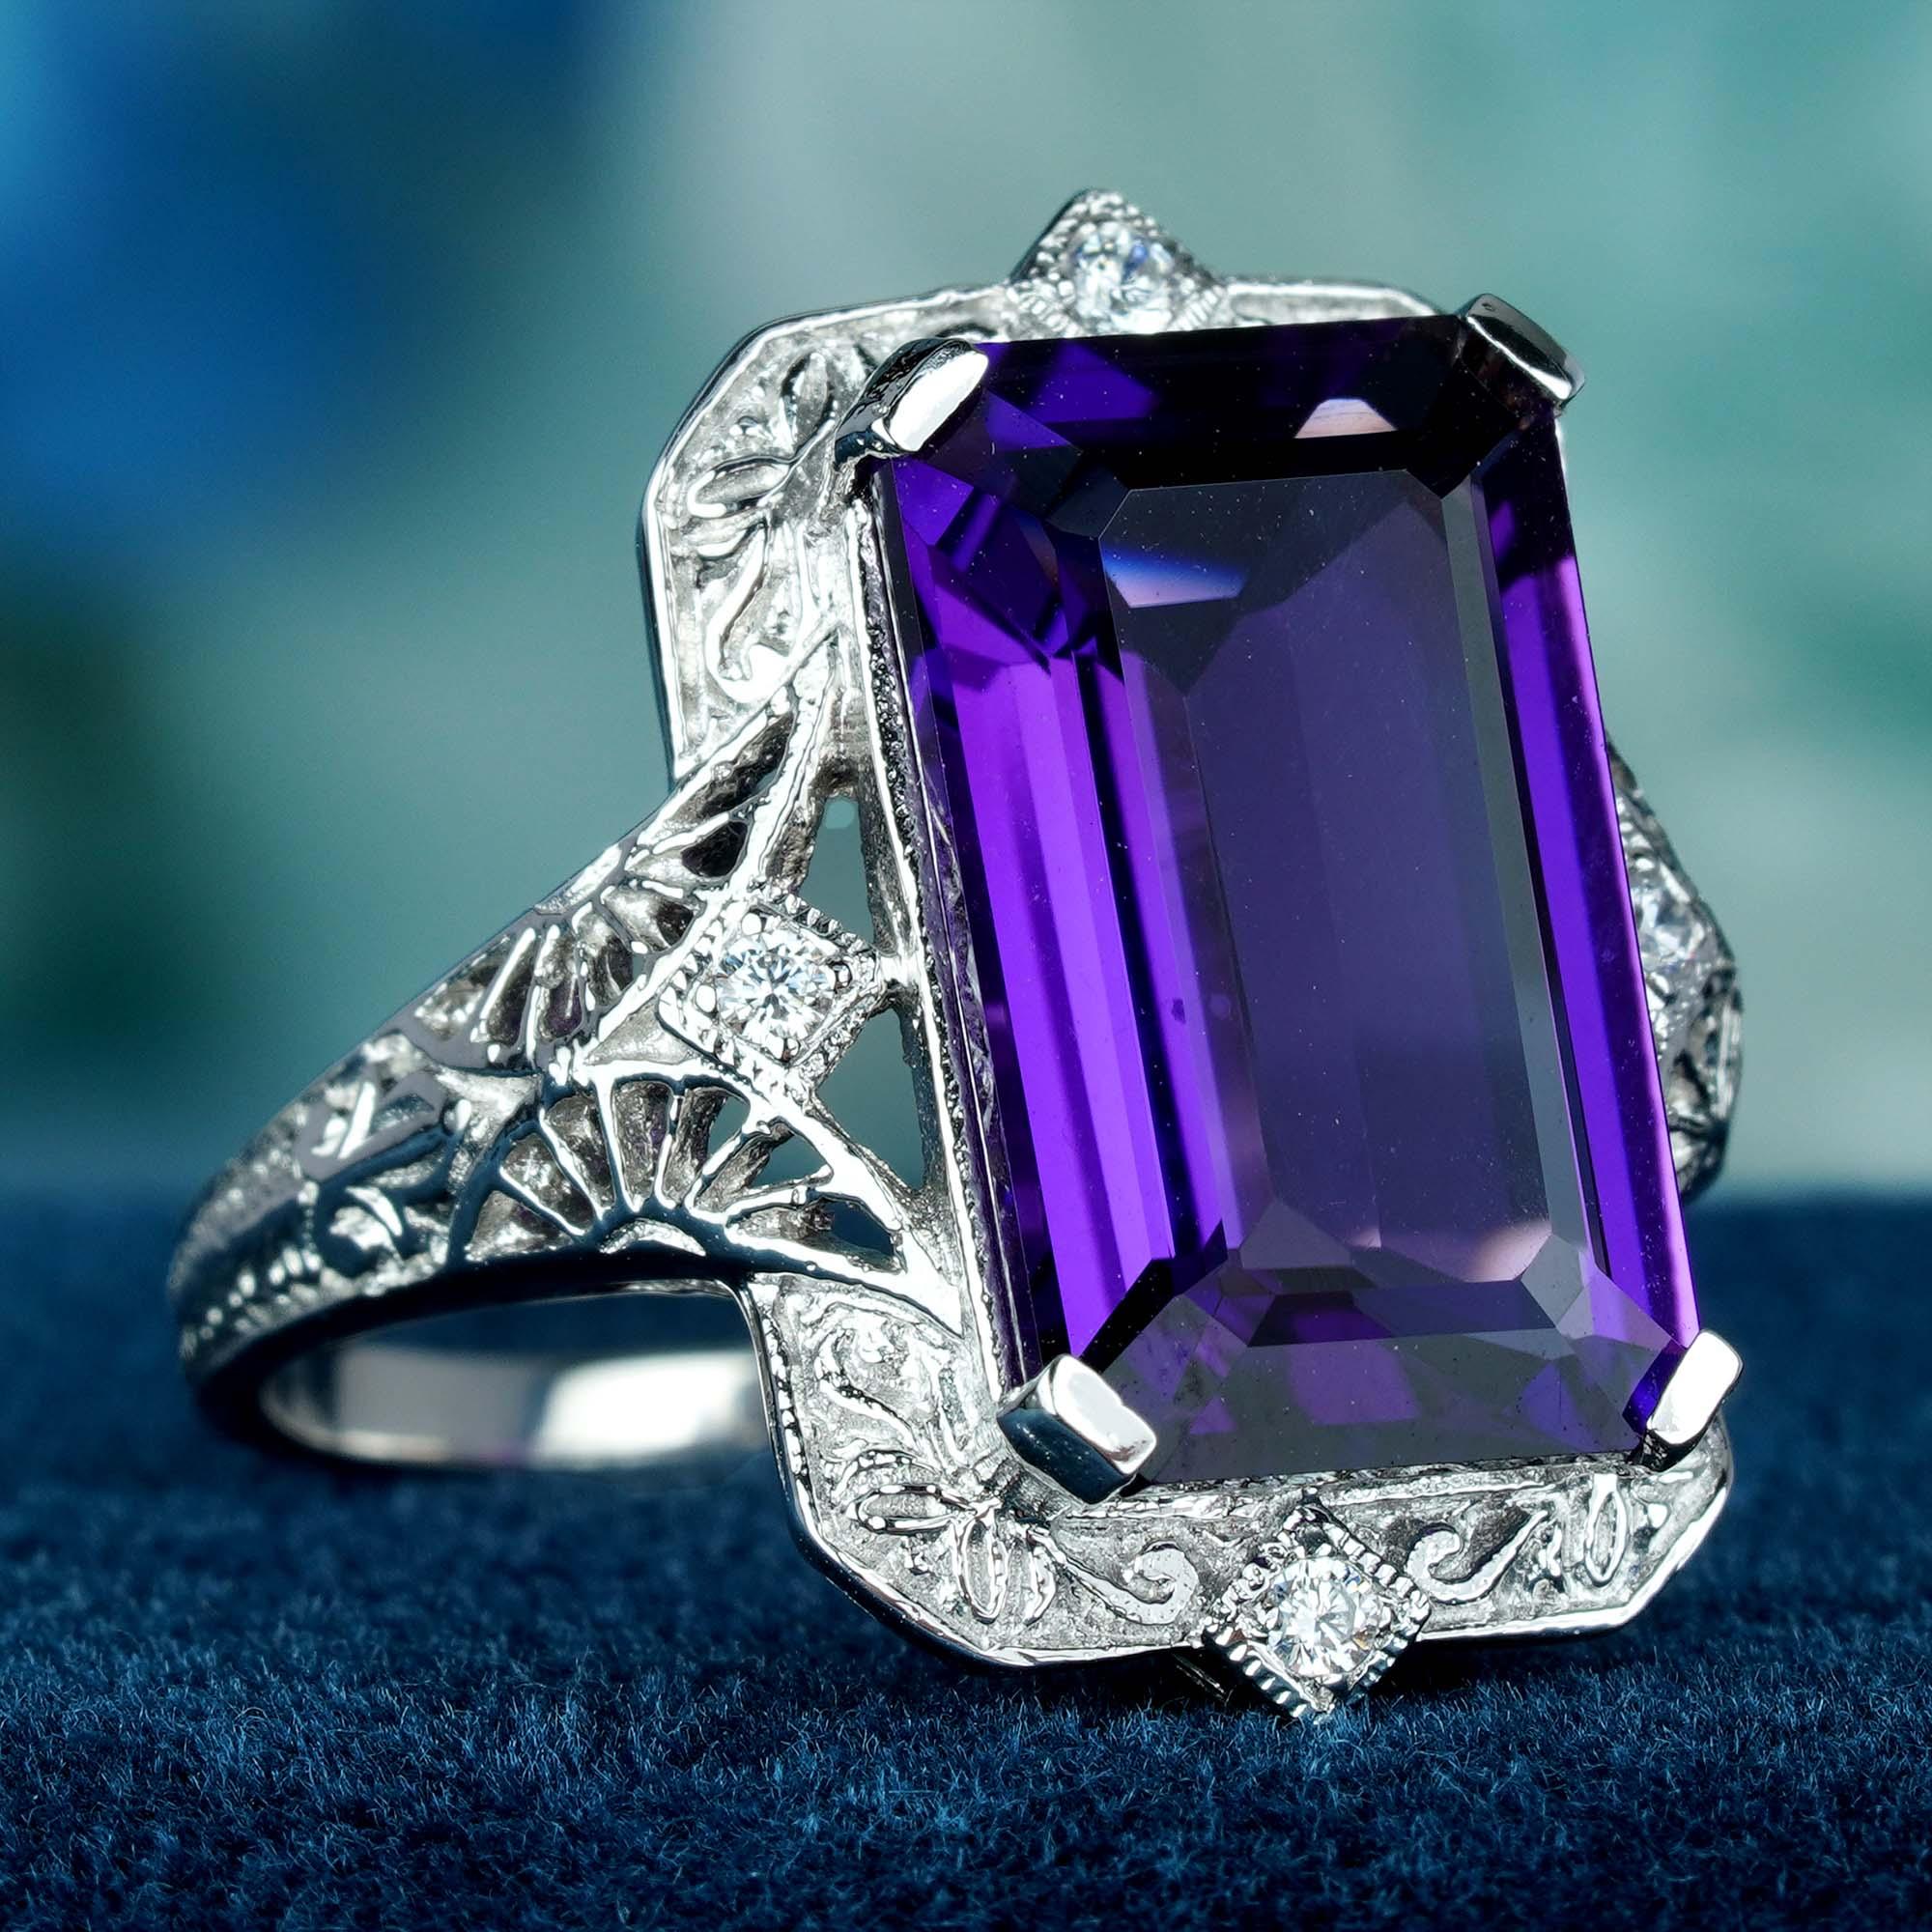 The ring is indeed a showstopper! The mesmerizing 6 carat emerald-cut amethyst, with a deep purple hue is both luxurious and eye-catching. The prong setting allows the amethyst to take center stage, while the intricate filigree detailing in a floral